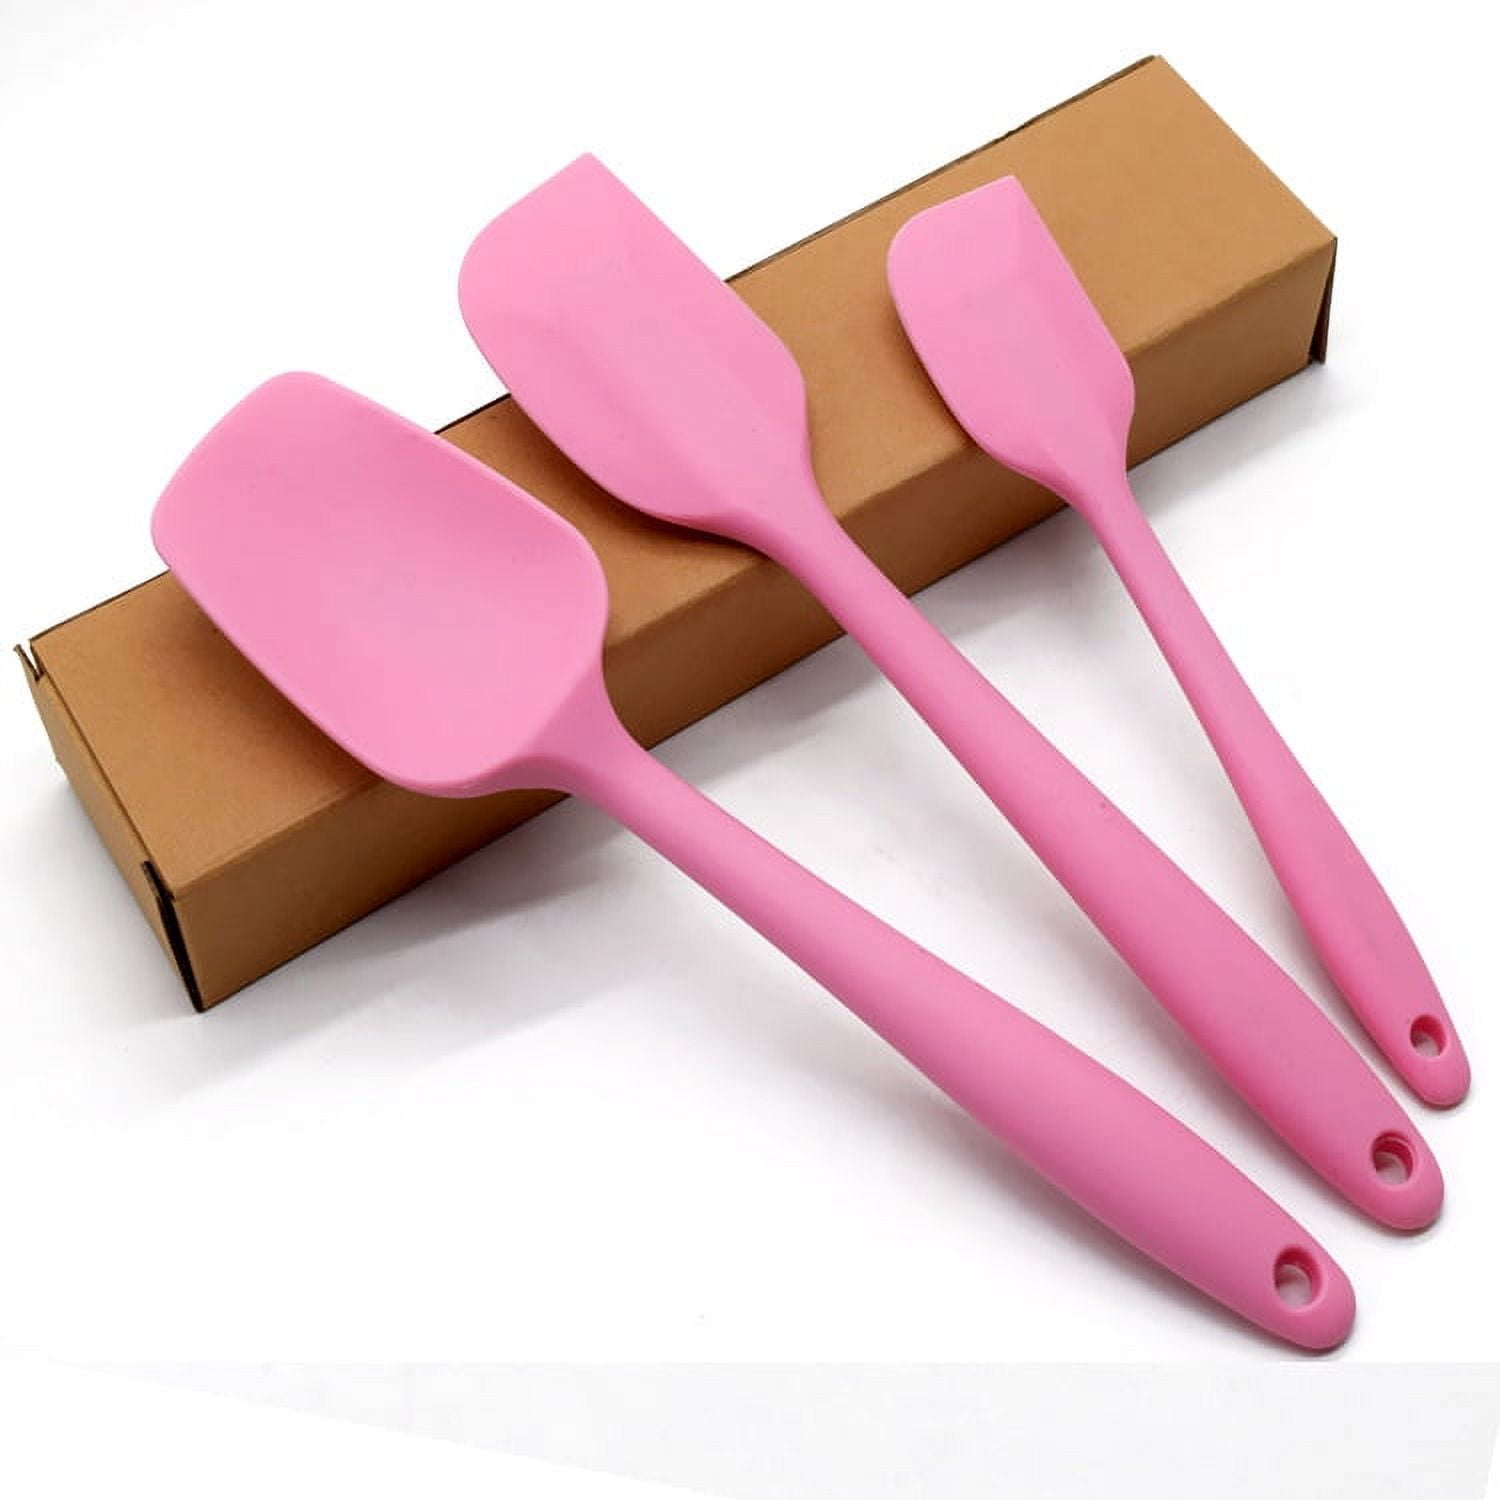 Silicone Spatula Set, Heat-Resistant Spatula - Non-Stick Rubber Spatula for  Cooking, Baking, and Mixing (5 Piece Set, Neon Pink)